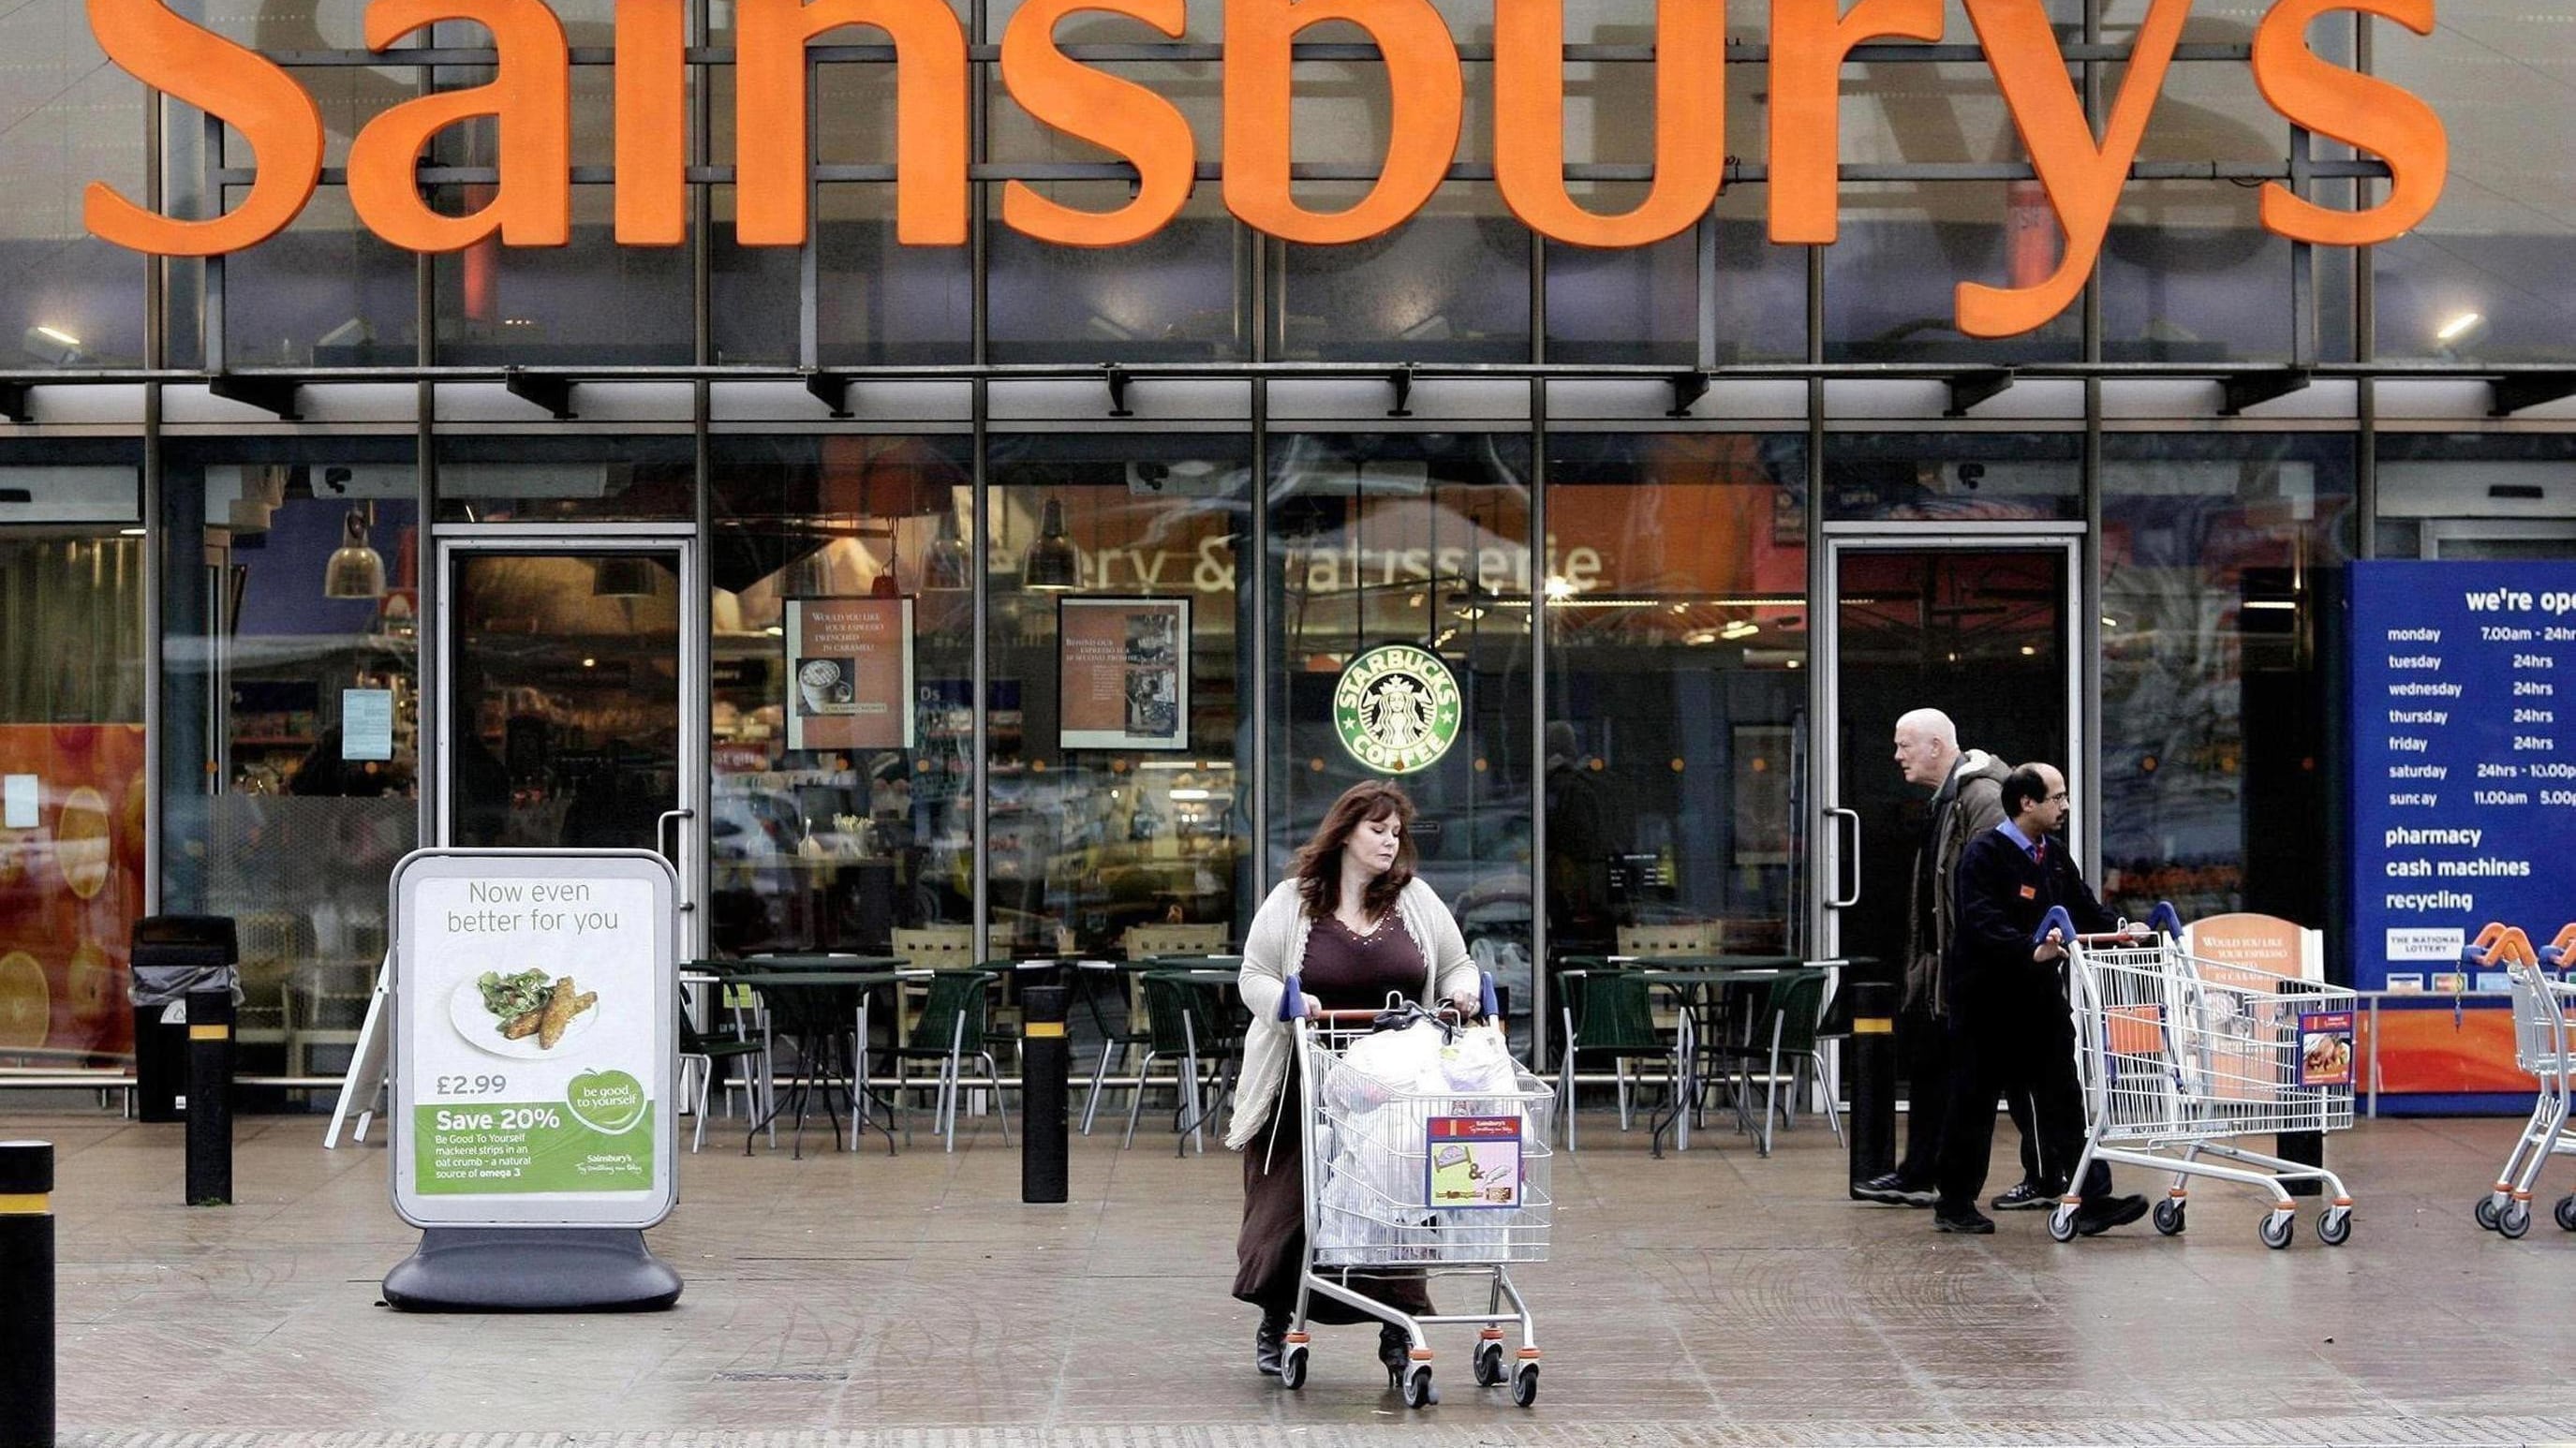 Sainsbury’s has seen sales growth slow despite solid grocery trading and a boost from the Euros after a hit from poor early summer weather to its Argos and seasonal ranges